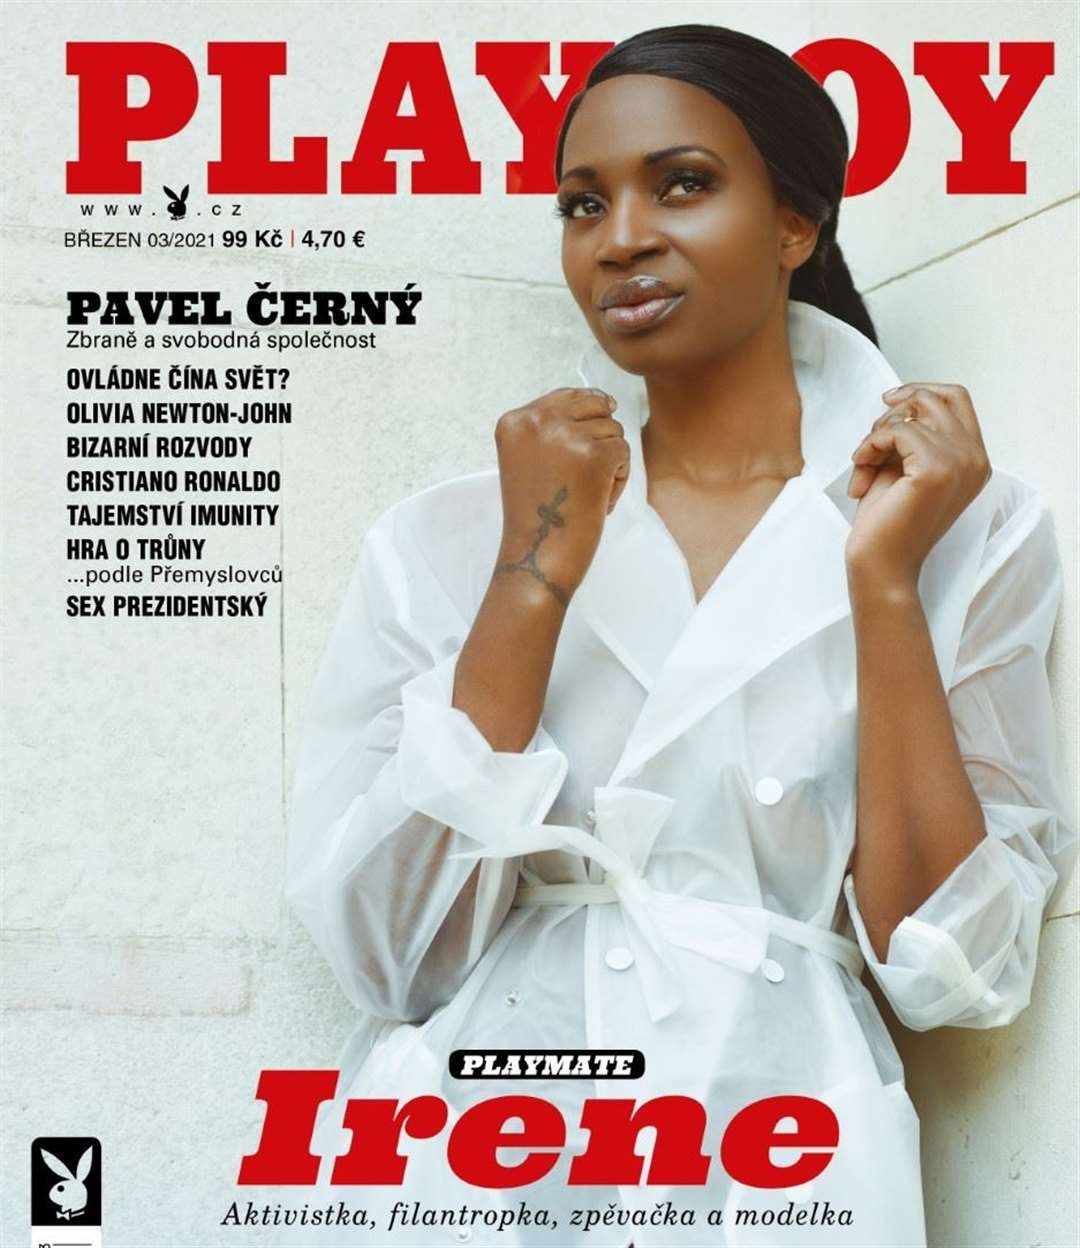 Irene on the cover of Playboy in the Czech Republic Picture: Veronika Marx, Playboy Czech Republic